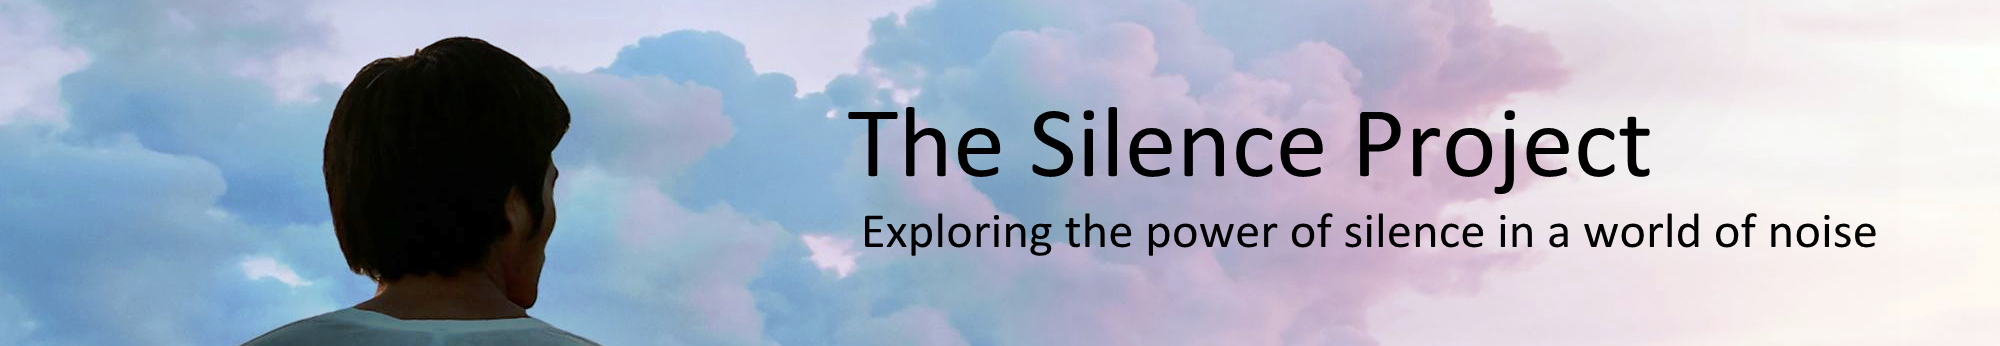 The Silence Project banner